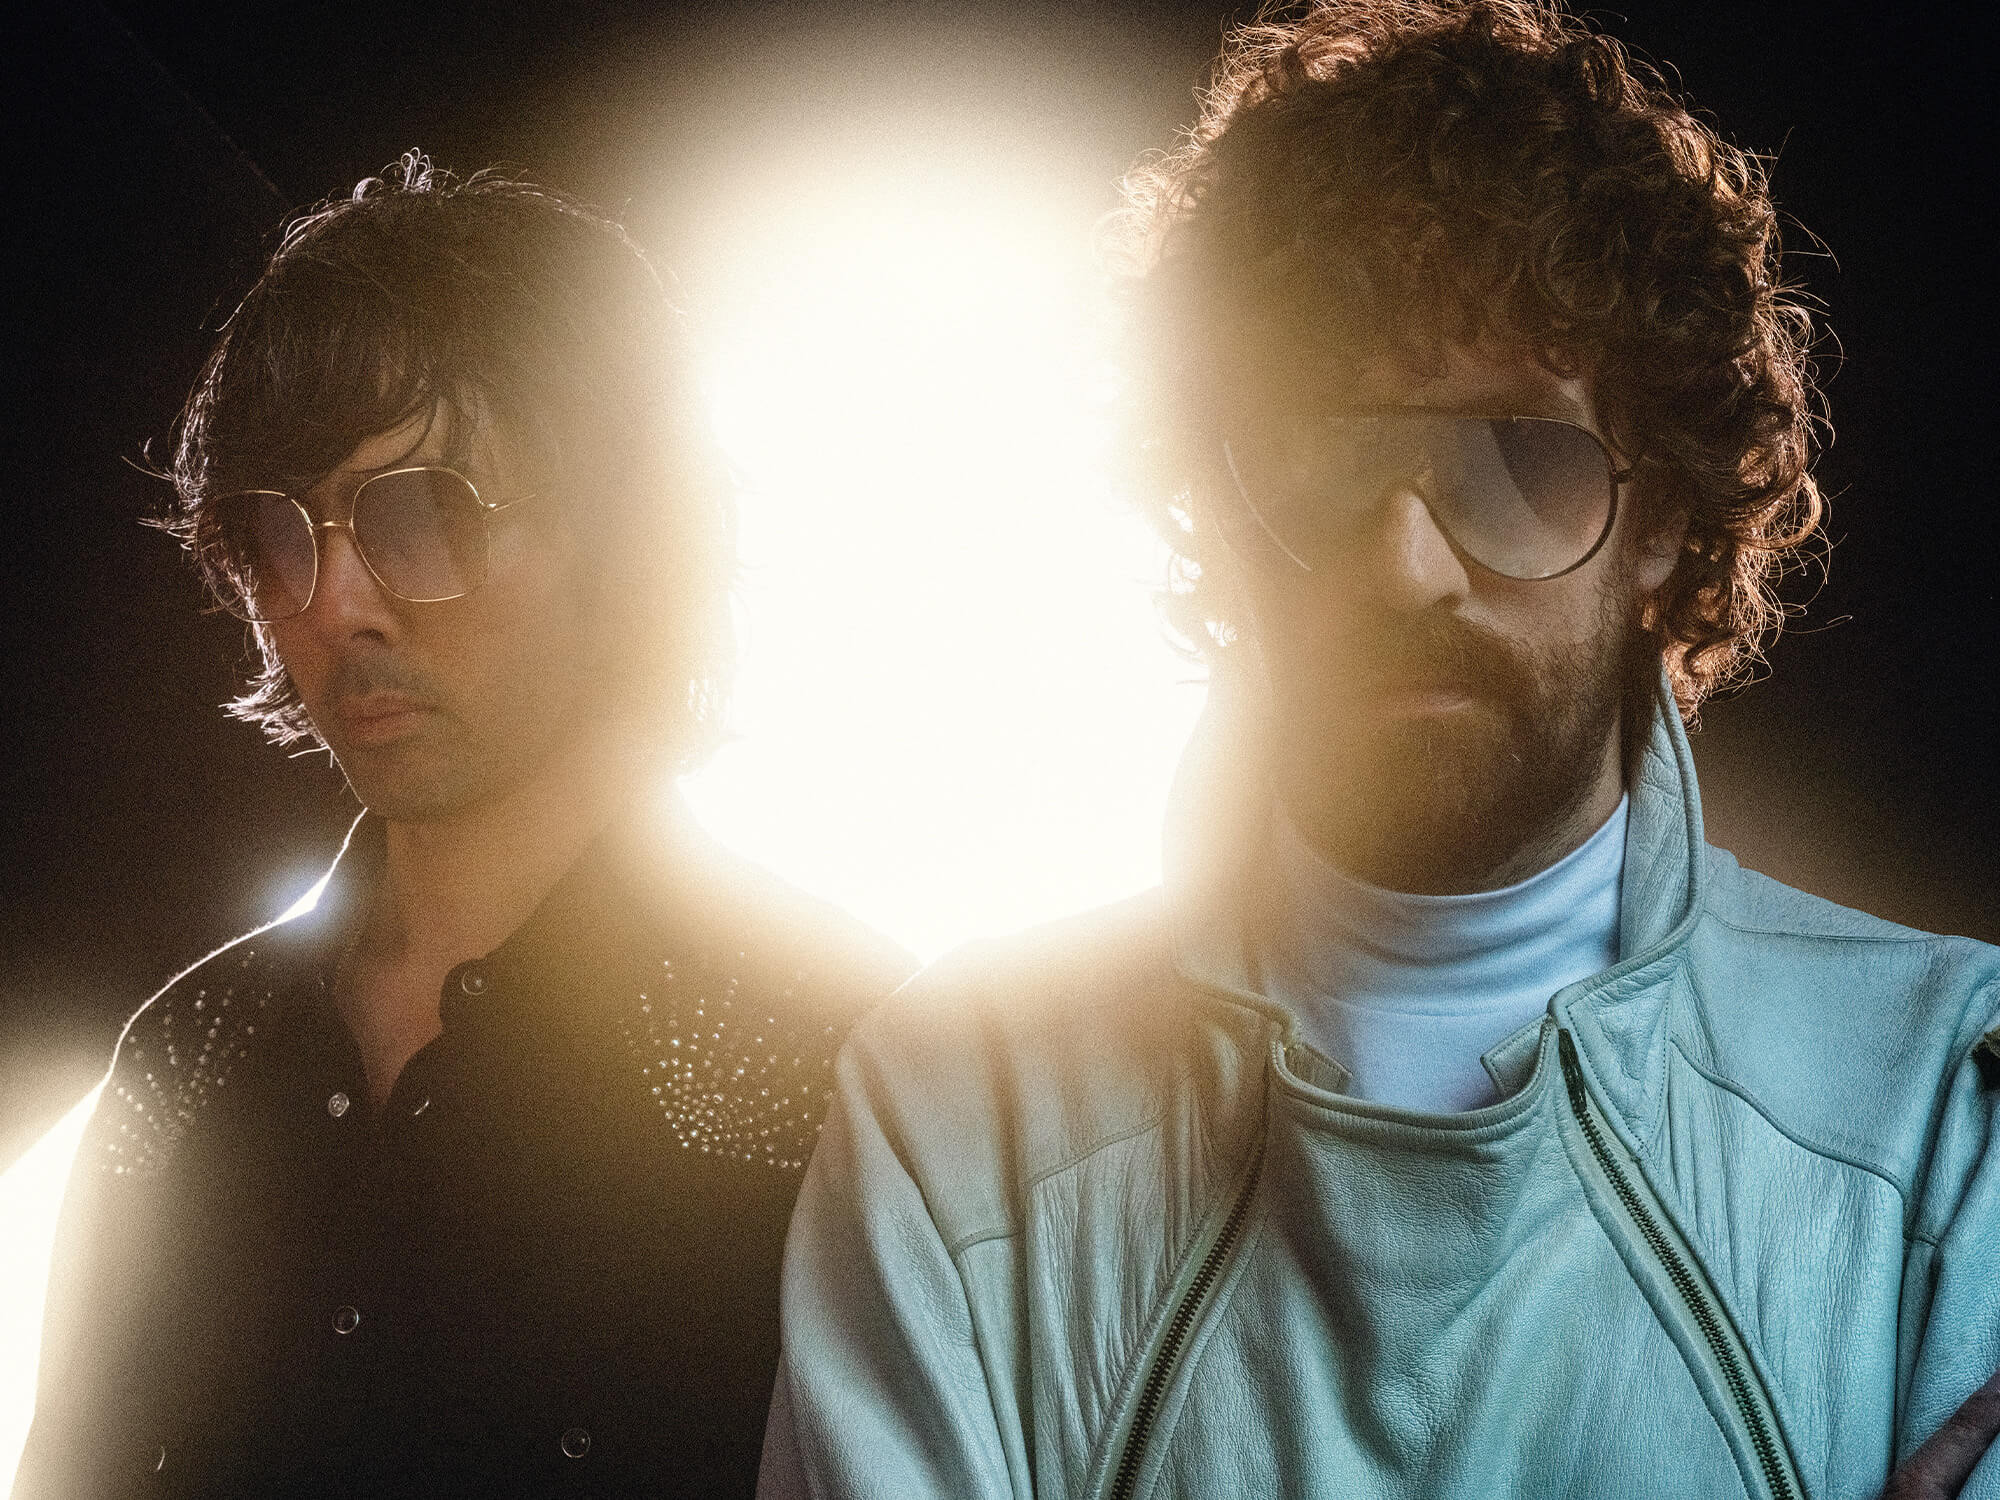 Justice standing in front of a bright white light. They are both wearing sunglasses and are looking directly at the camera.